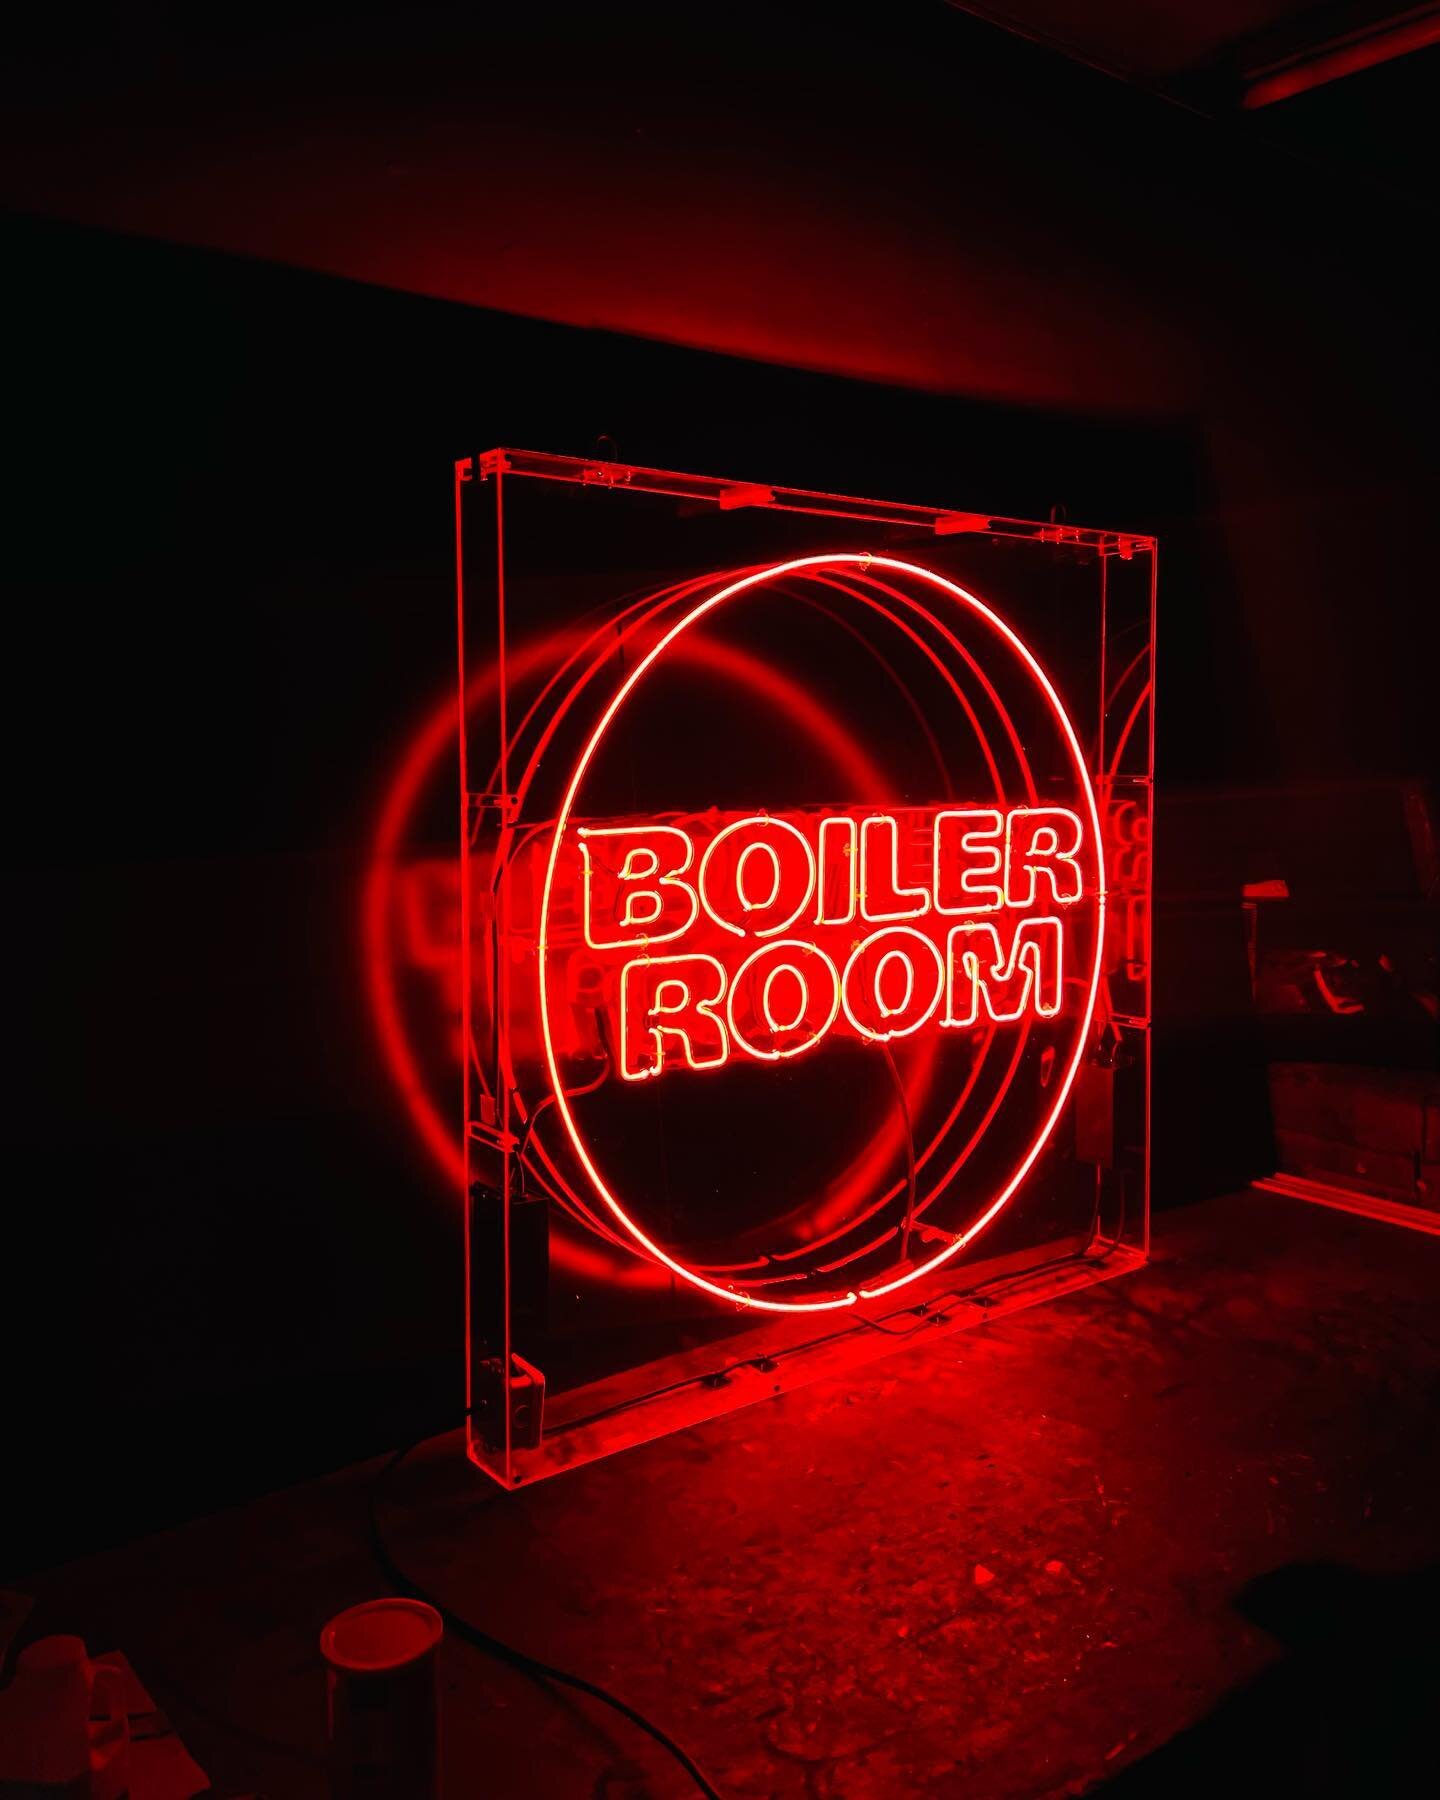 💃🏻FESTIVAL SEASON 💃🏻.
.
Hot stuff completed last week for @openairfly @boilerroomtv and @nrg_raves at Hopetoun House - Big old neon - big energy RGB lightbox.
.
That festival season is well and truly upon us - hit us up for that proper signage re